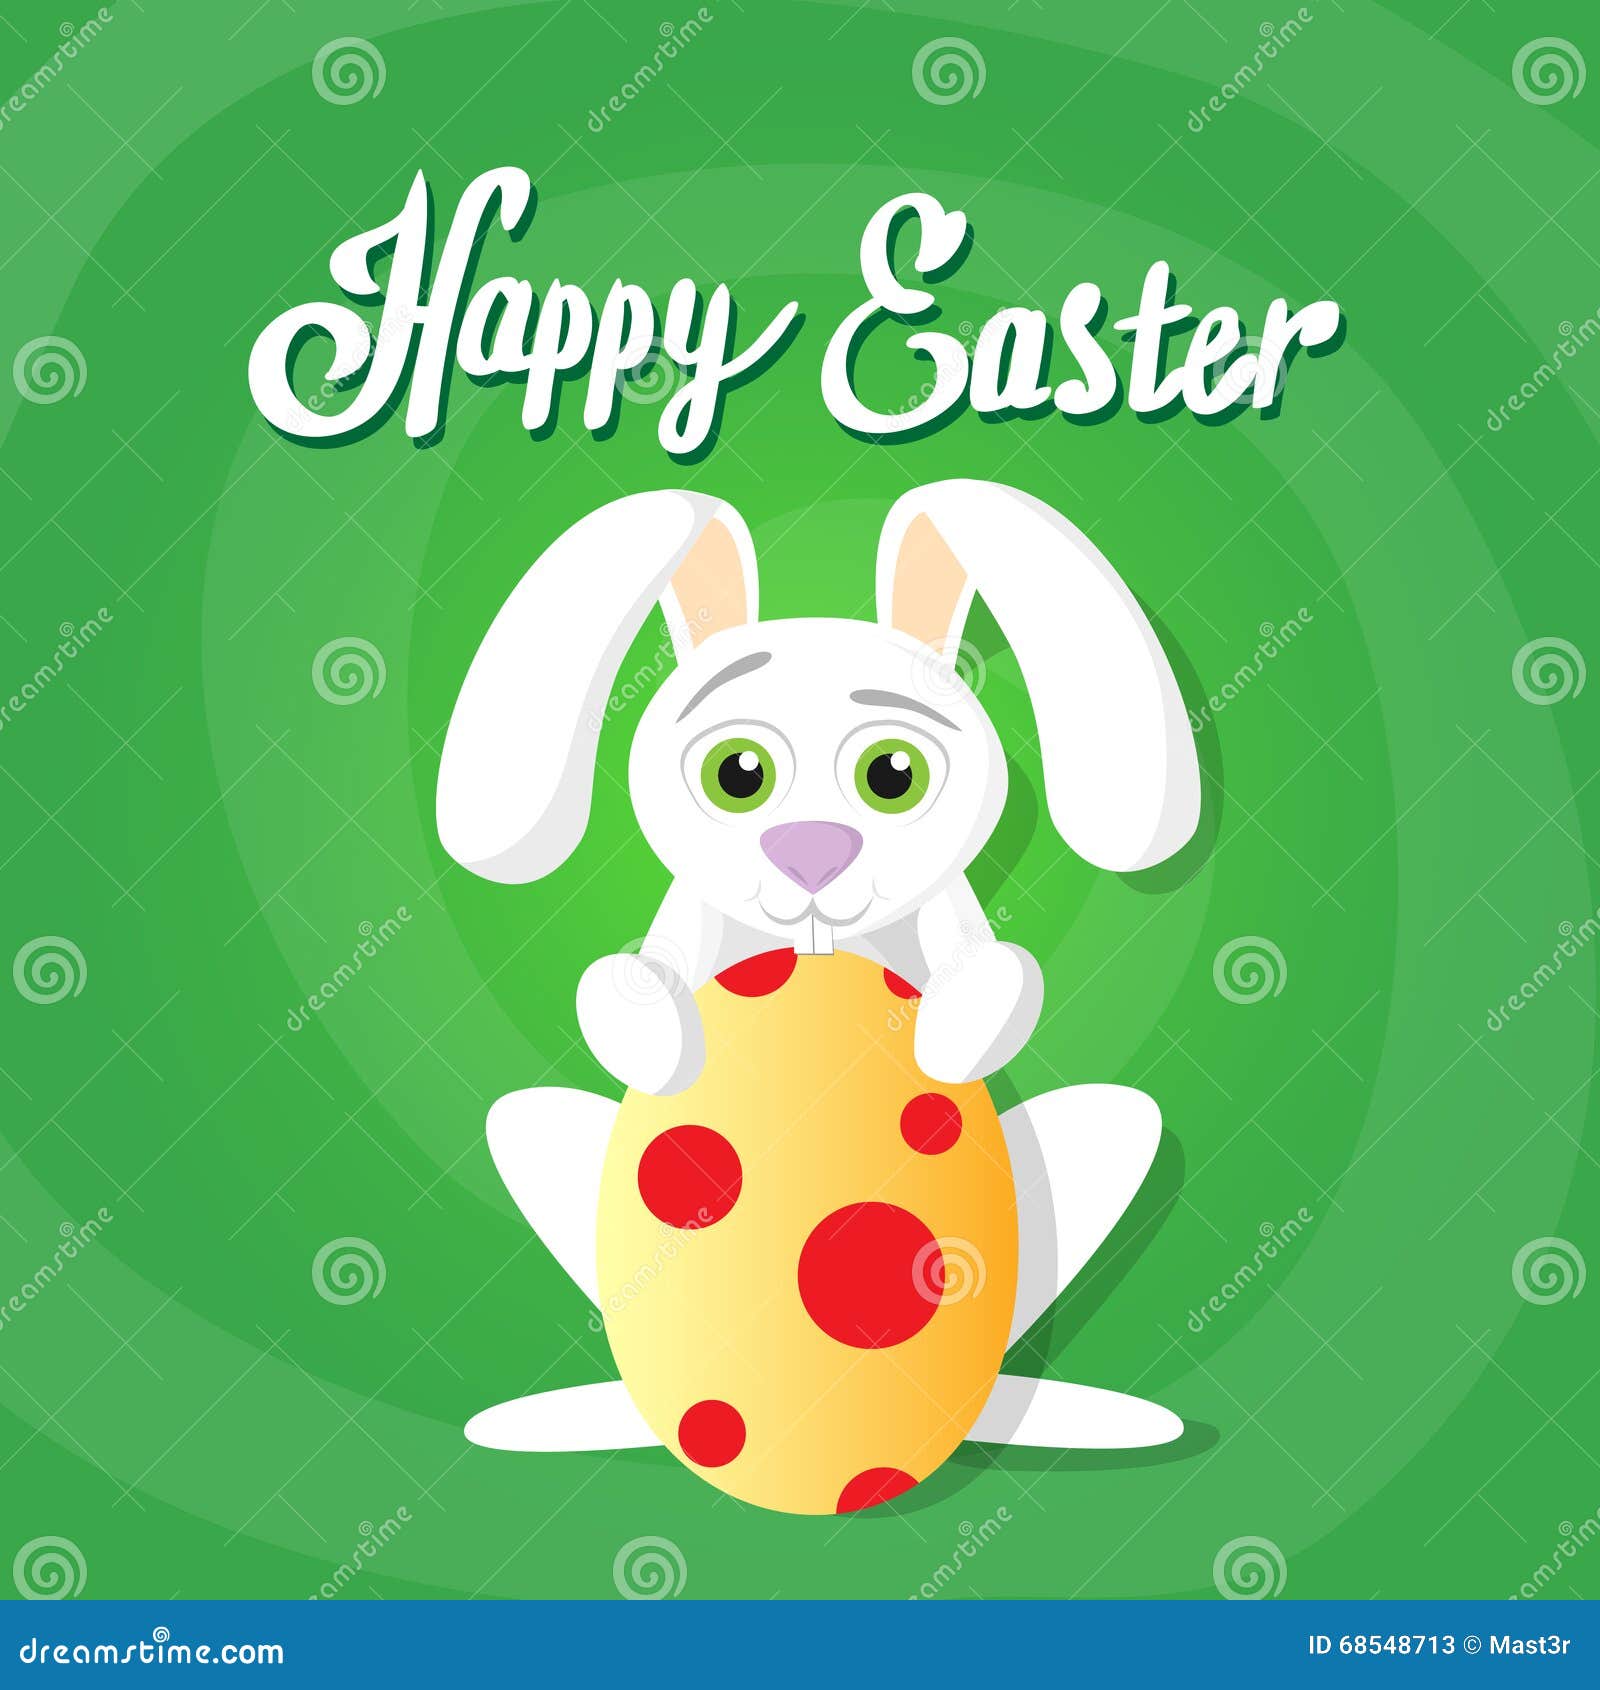 Easter Rabbit Hold Decorated Colorful Egg Holiday Symbols Stock Vector ...